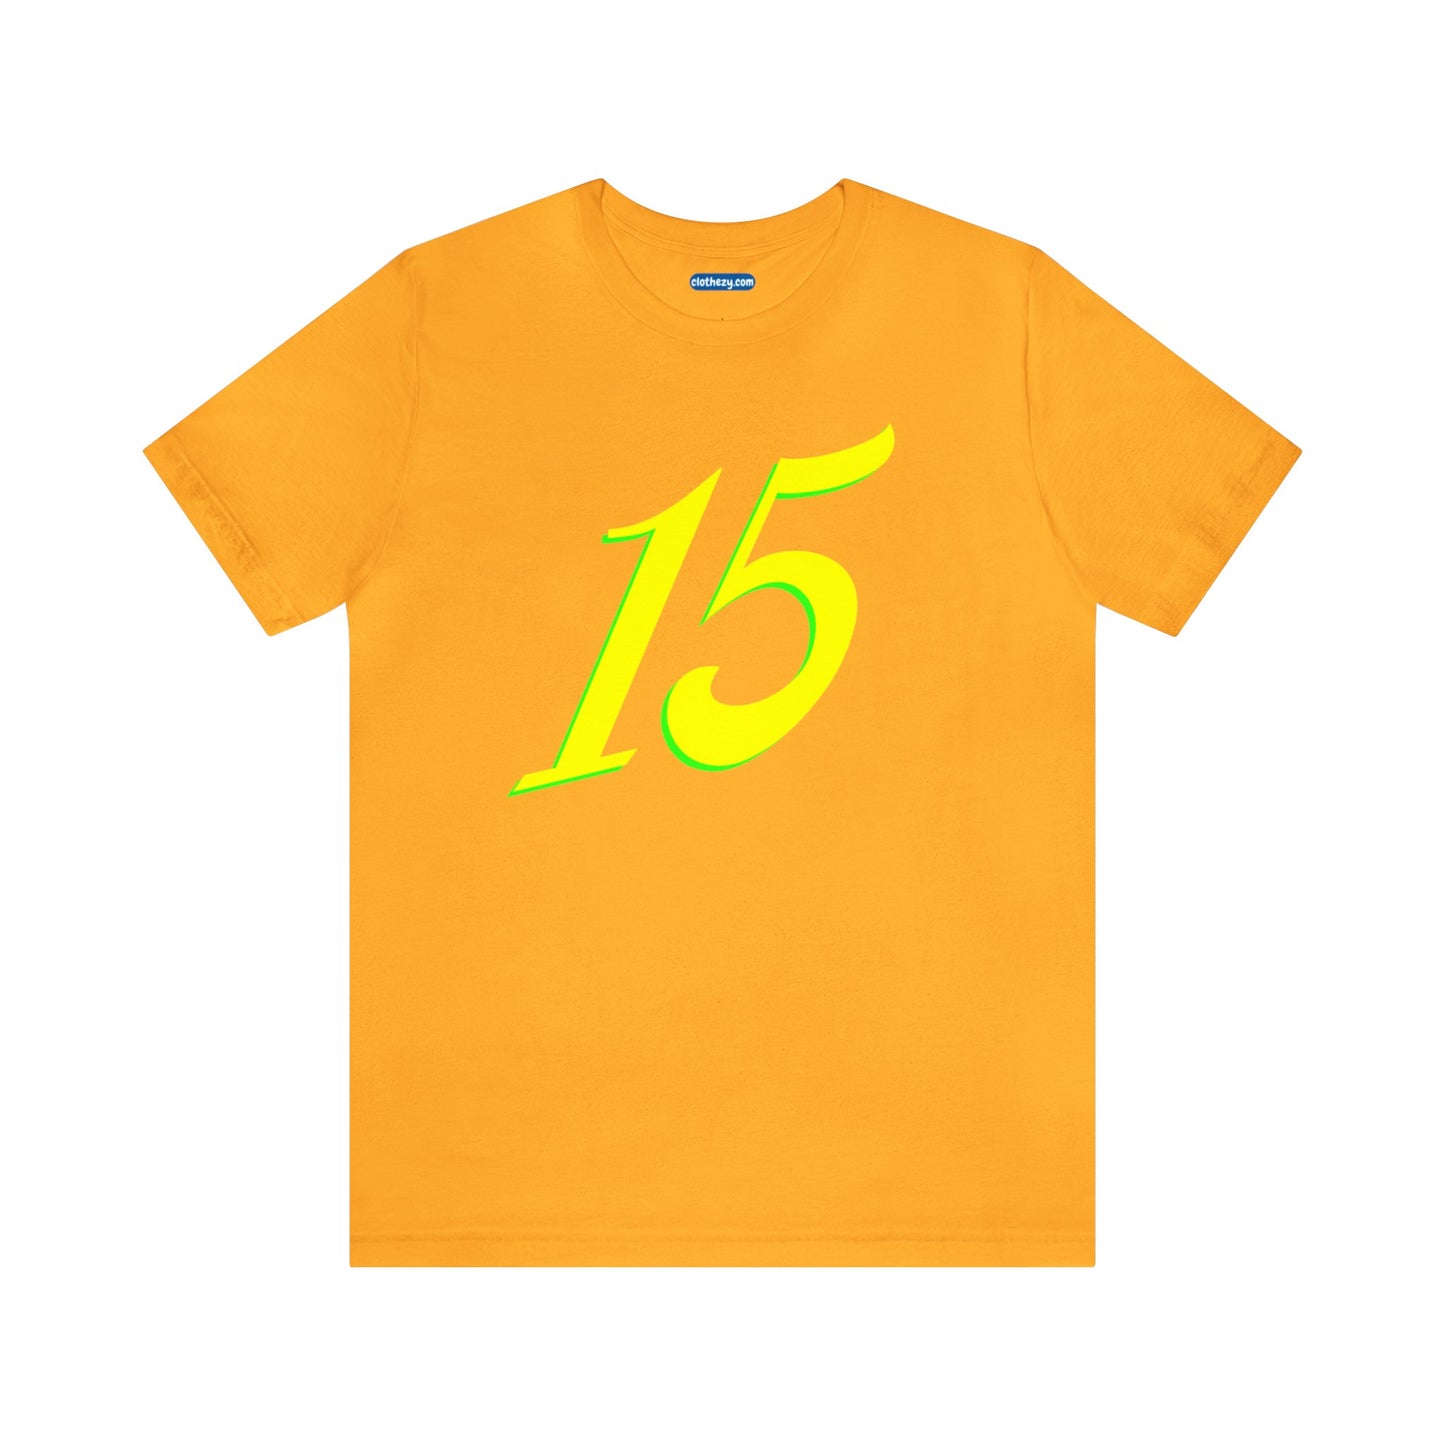 Number 15 Design - Soft Cotton Tee for birthdays and celebrations, Gift for friends and family, Multiple Options by clothezy.com in Green Heather Size Small - Buy Now